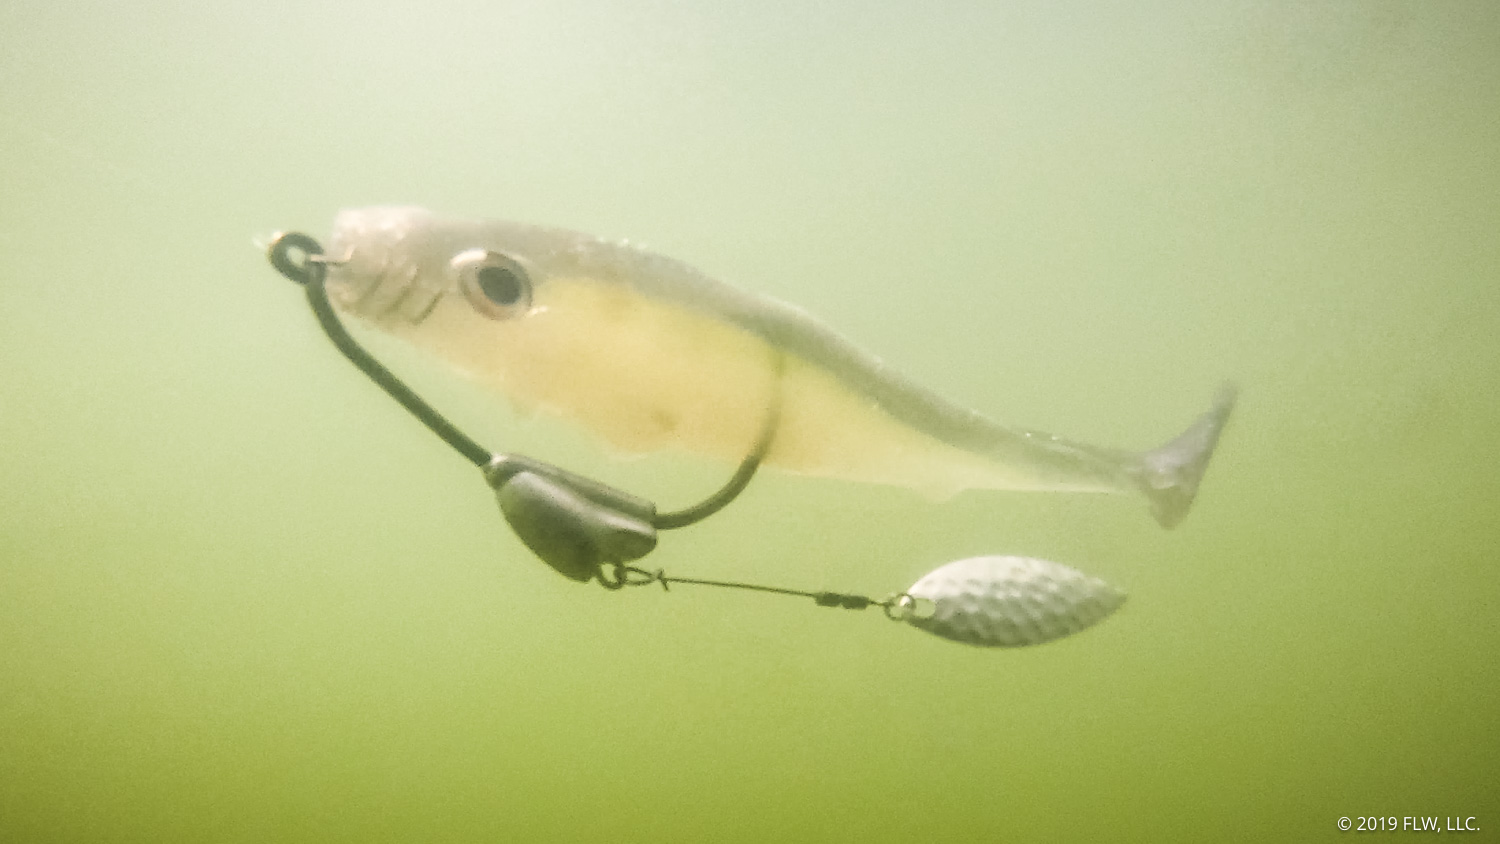 New Spinnerbaits & Buzzbaits for 2016 - ICAST - Wired2Fish